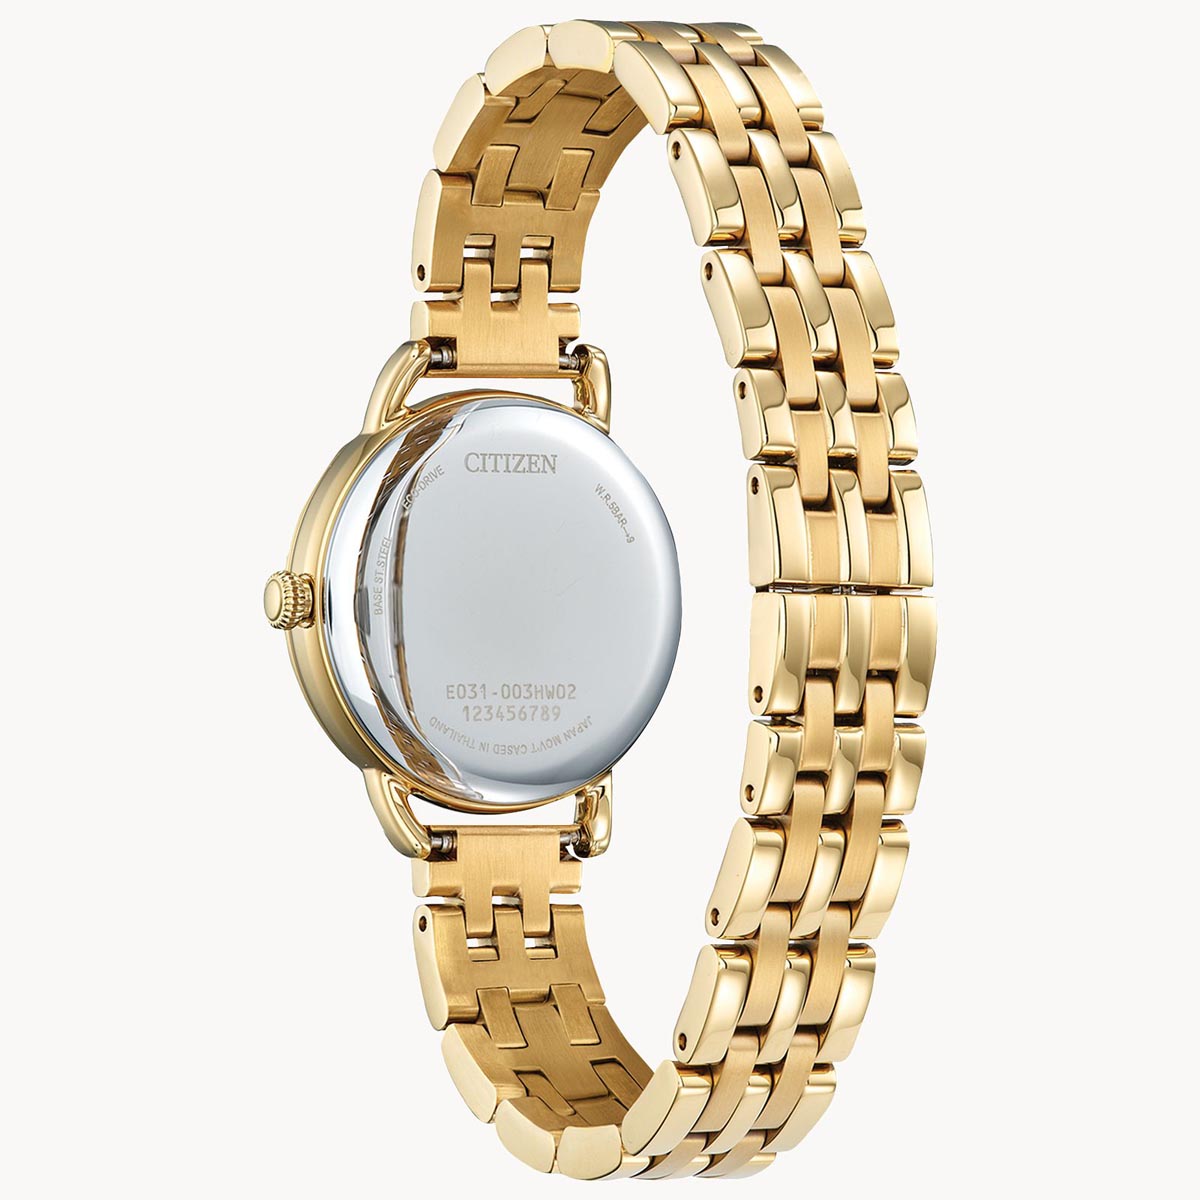 Citizen Coin Edge Womens Watch with White Dial and Yellow Gold Toned Bracelet (eco drive movement)